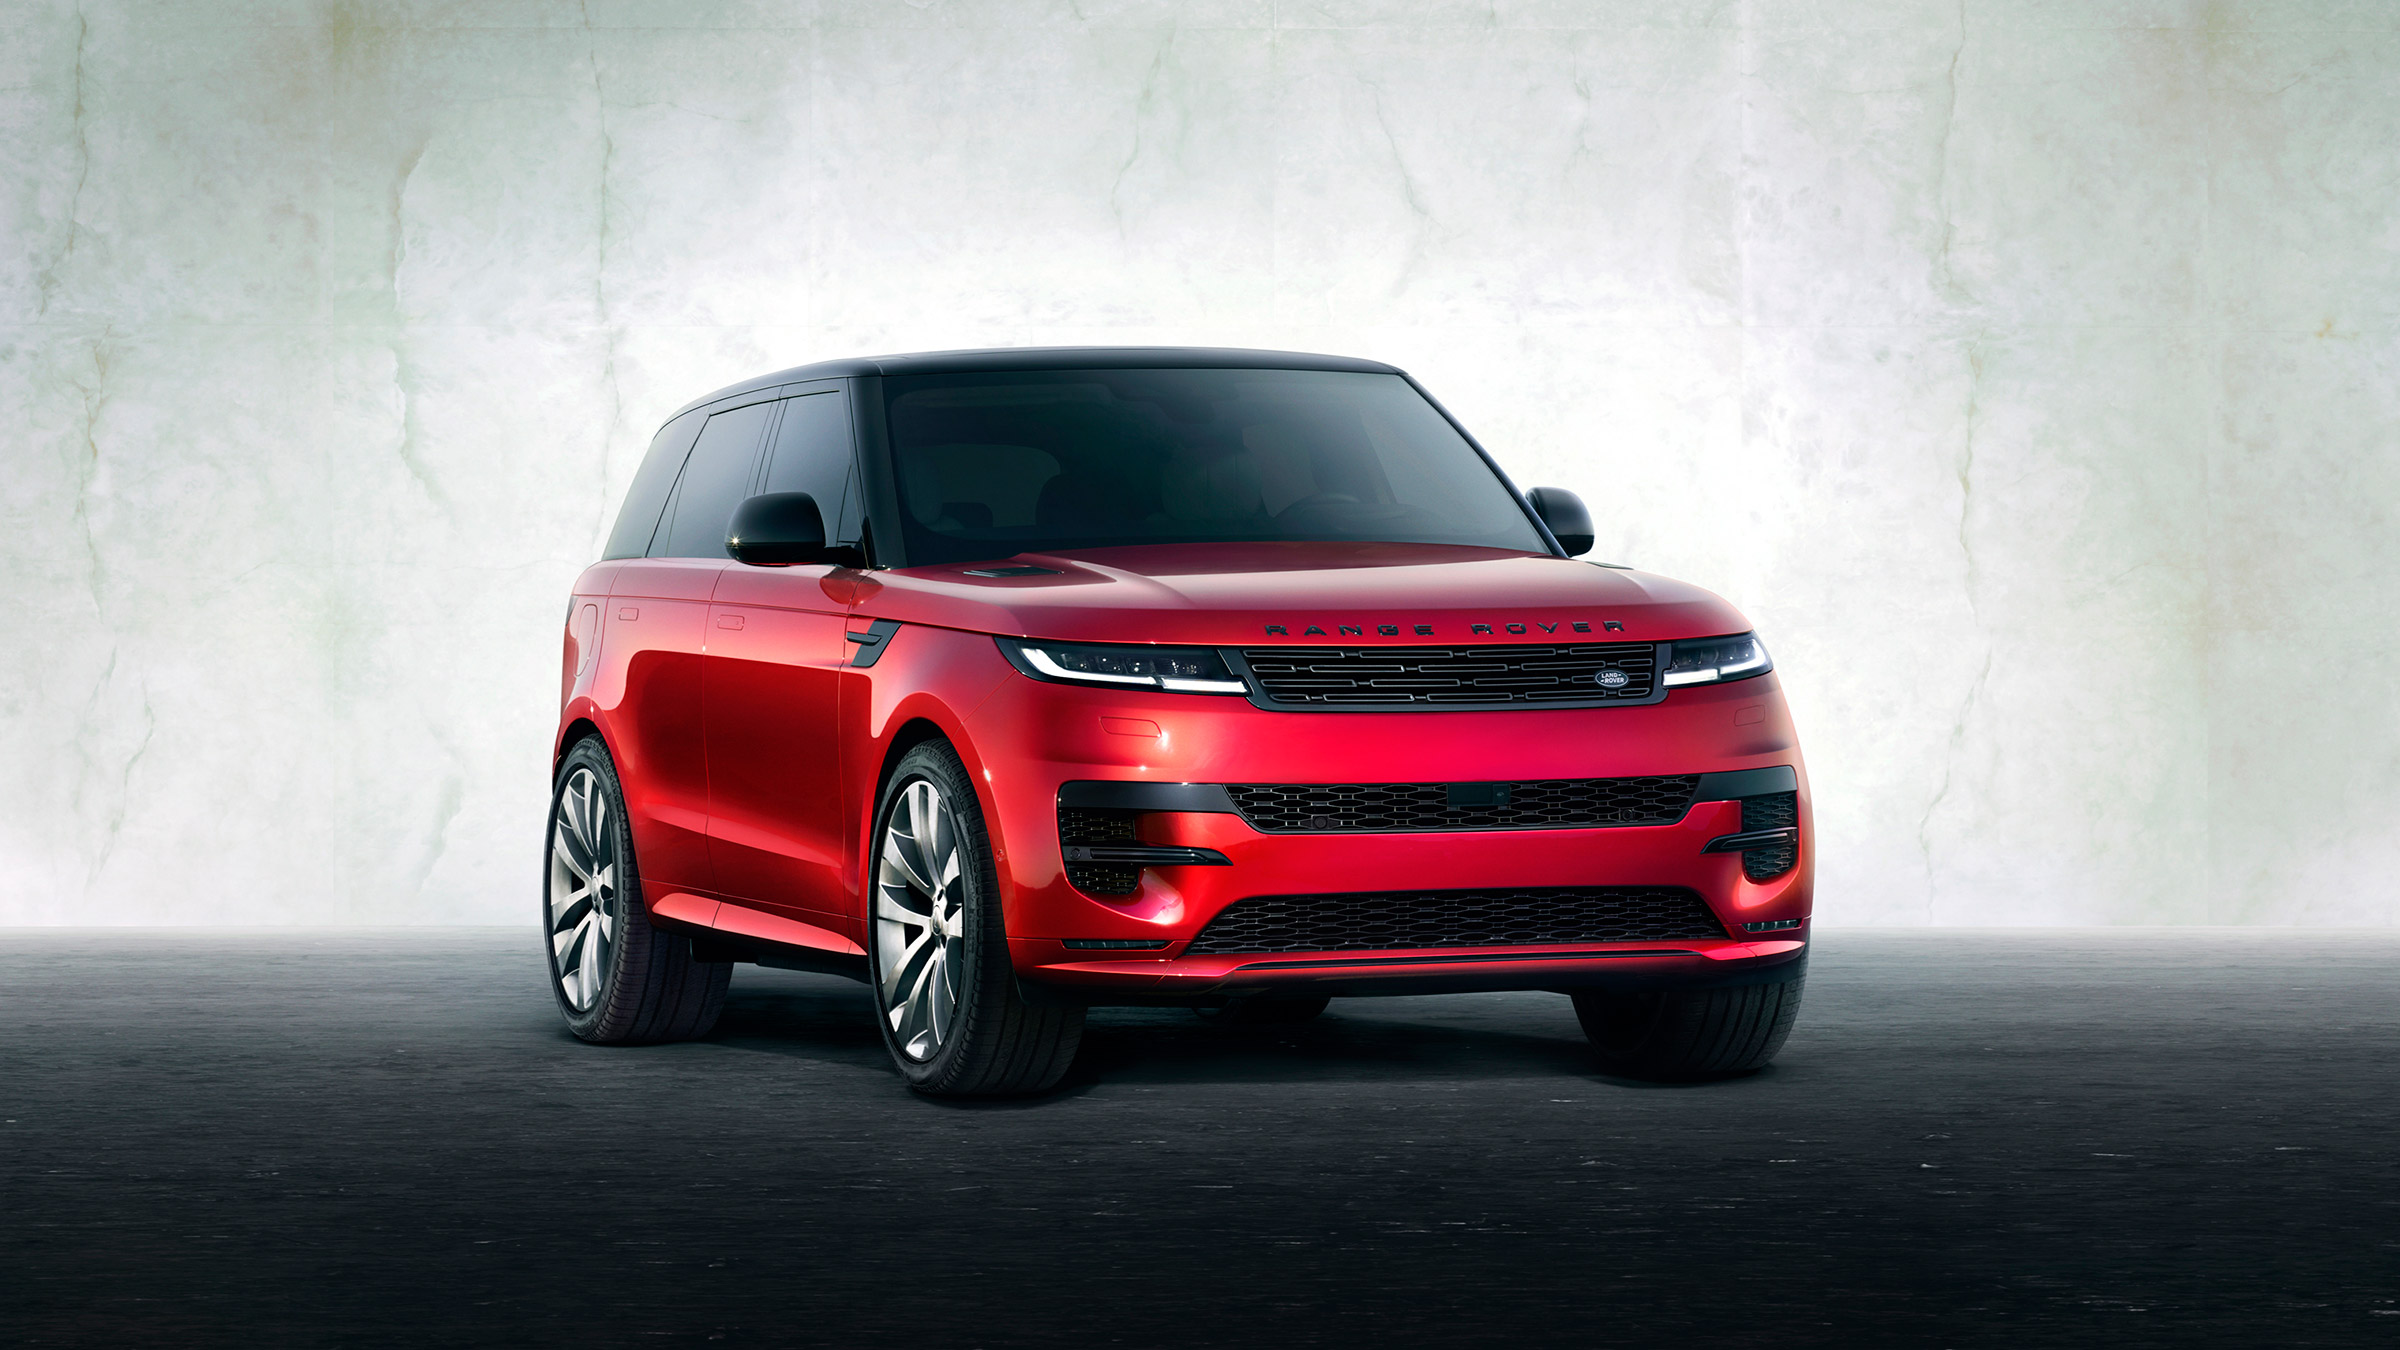 All-new Range Rover Sport debuts with sleek new look